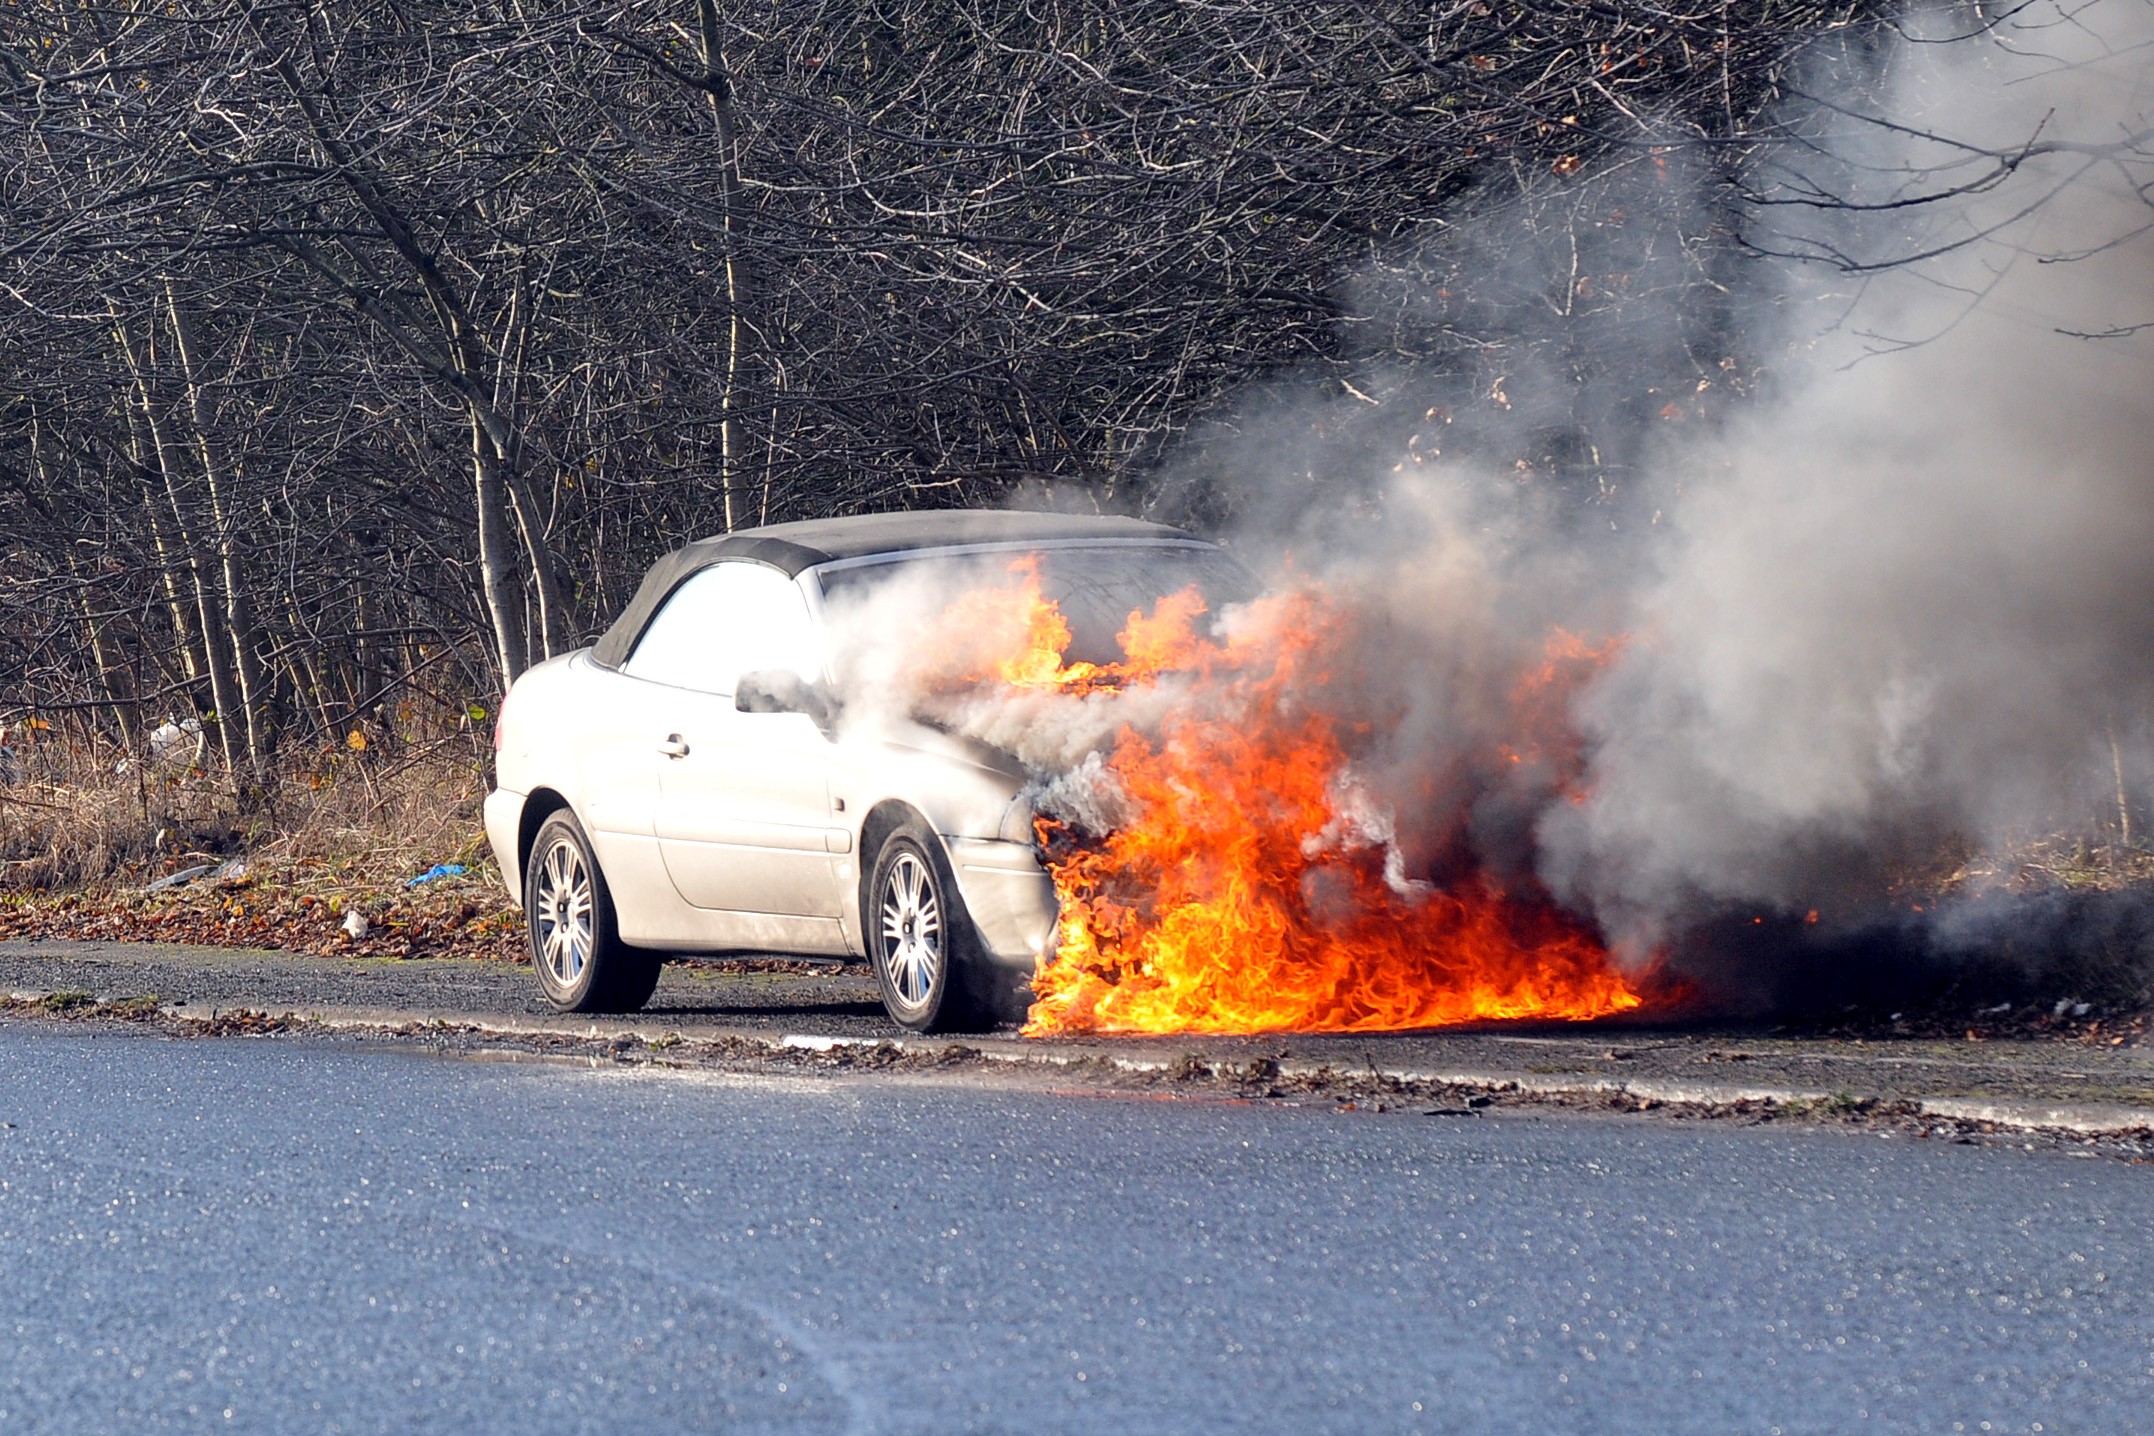 London Road blocked by vehicle fire